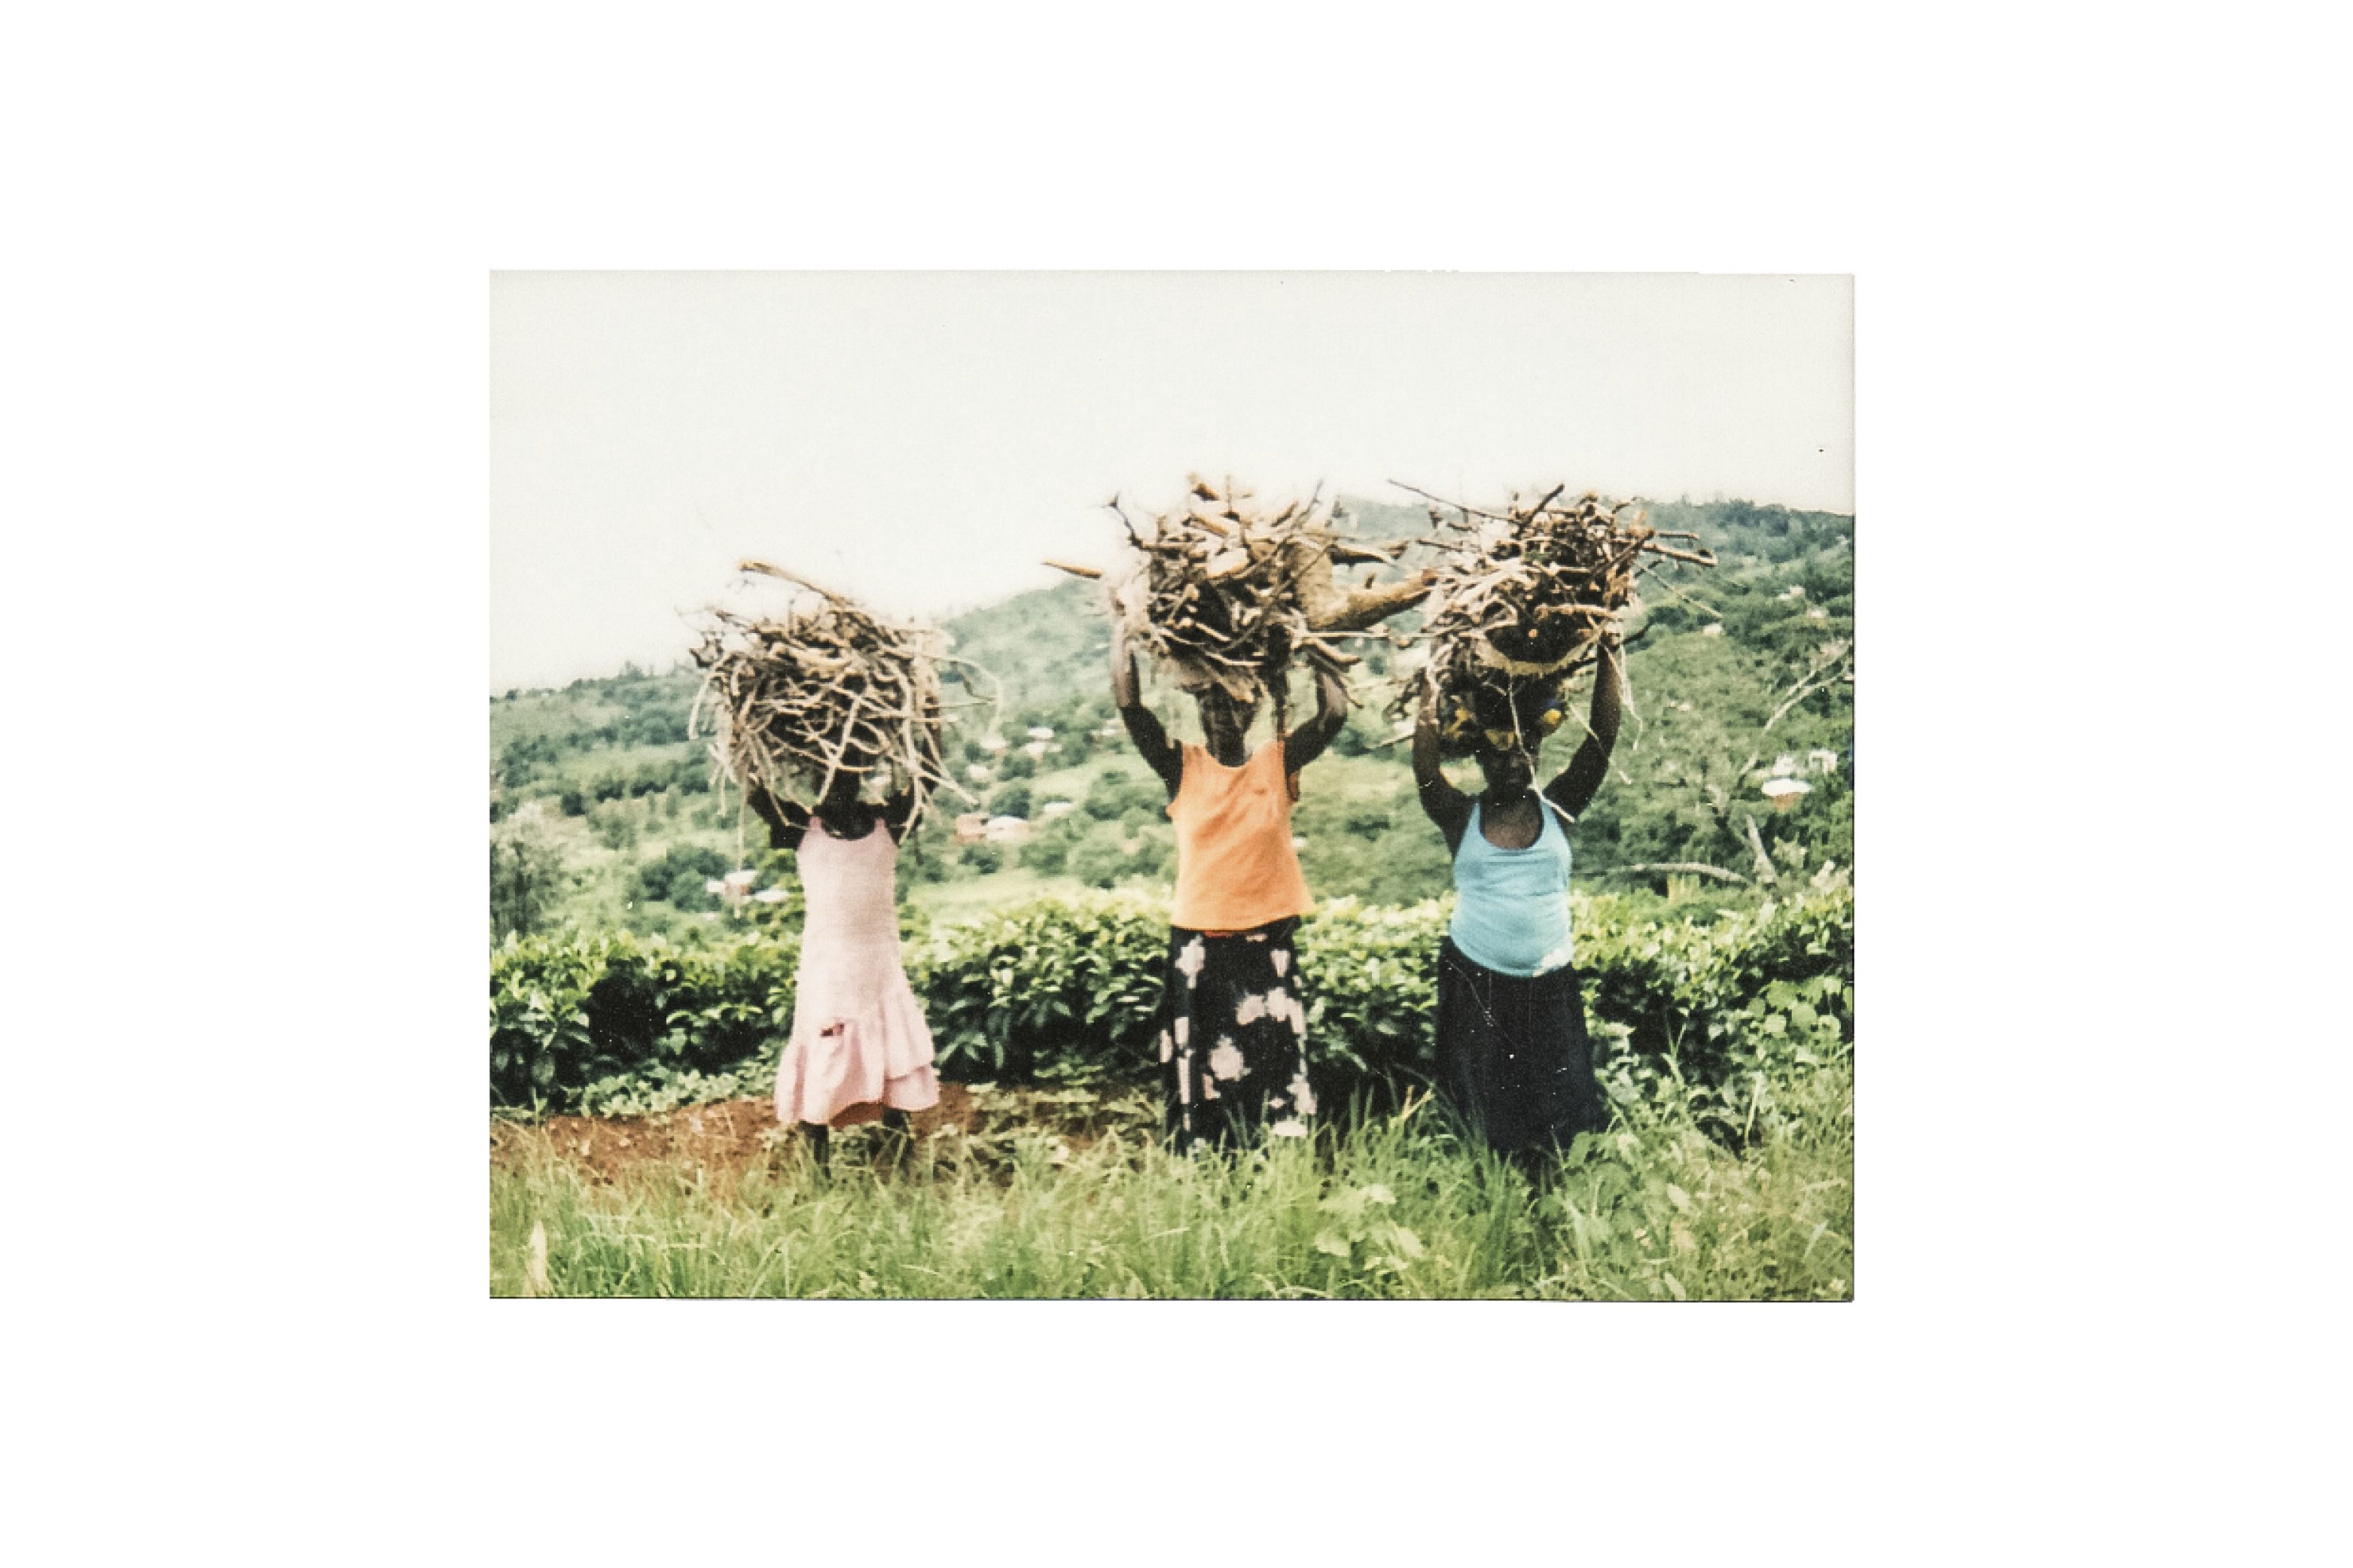 Every three days, Charity, Merica, and Rhoda walk from Mulemba village up Mulanje Mountain to collect firewood. "It is very heavy," Rhoda (left) says. Image by Nathalie Bertrams. Malawi, 2017.